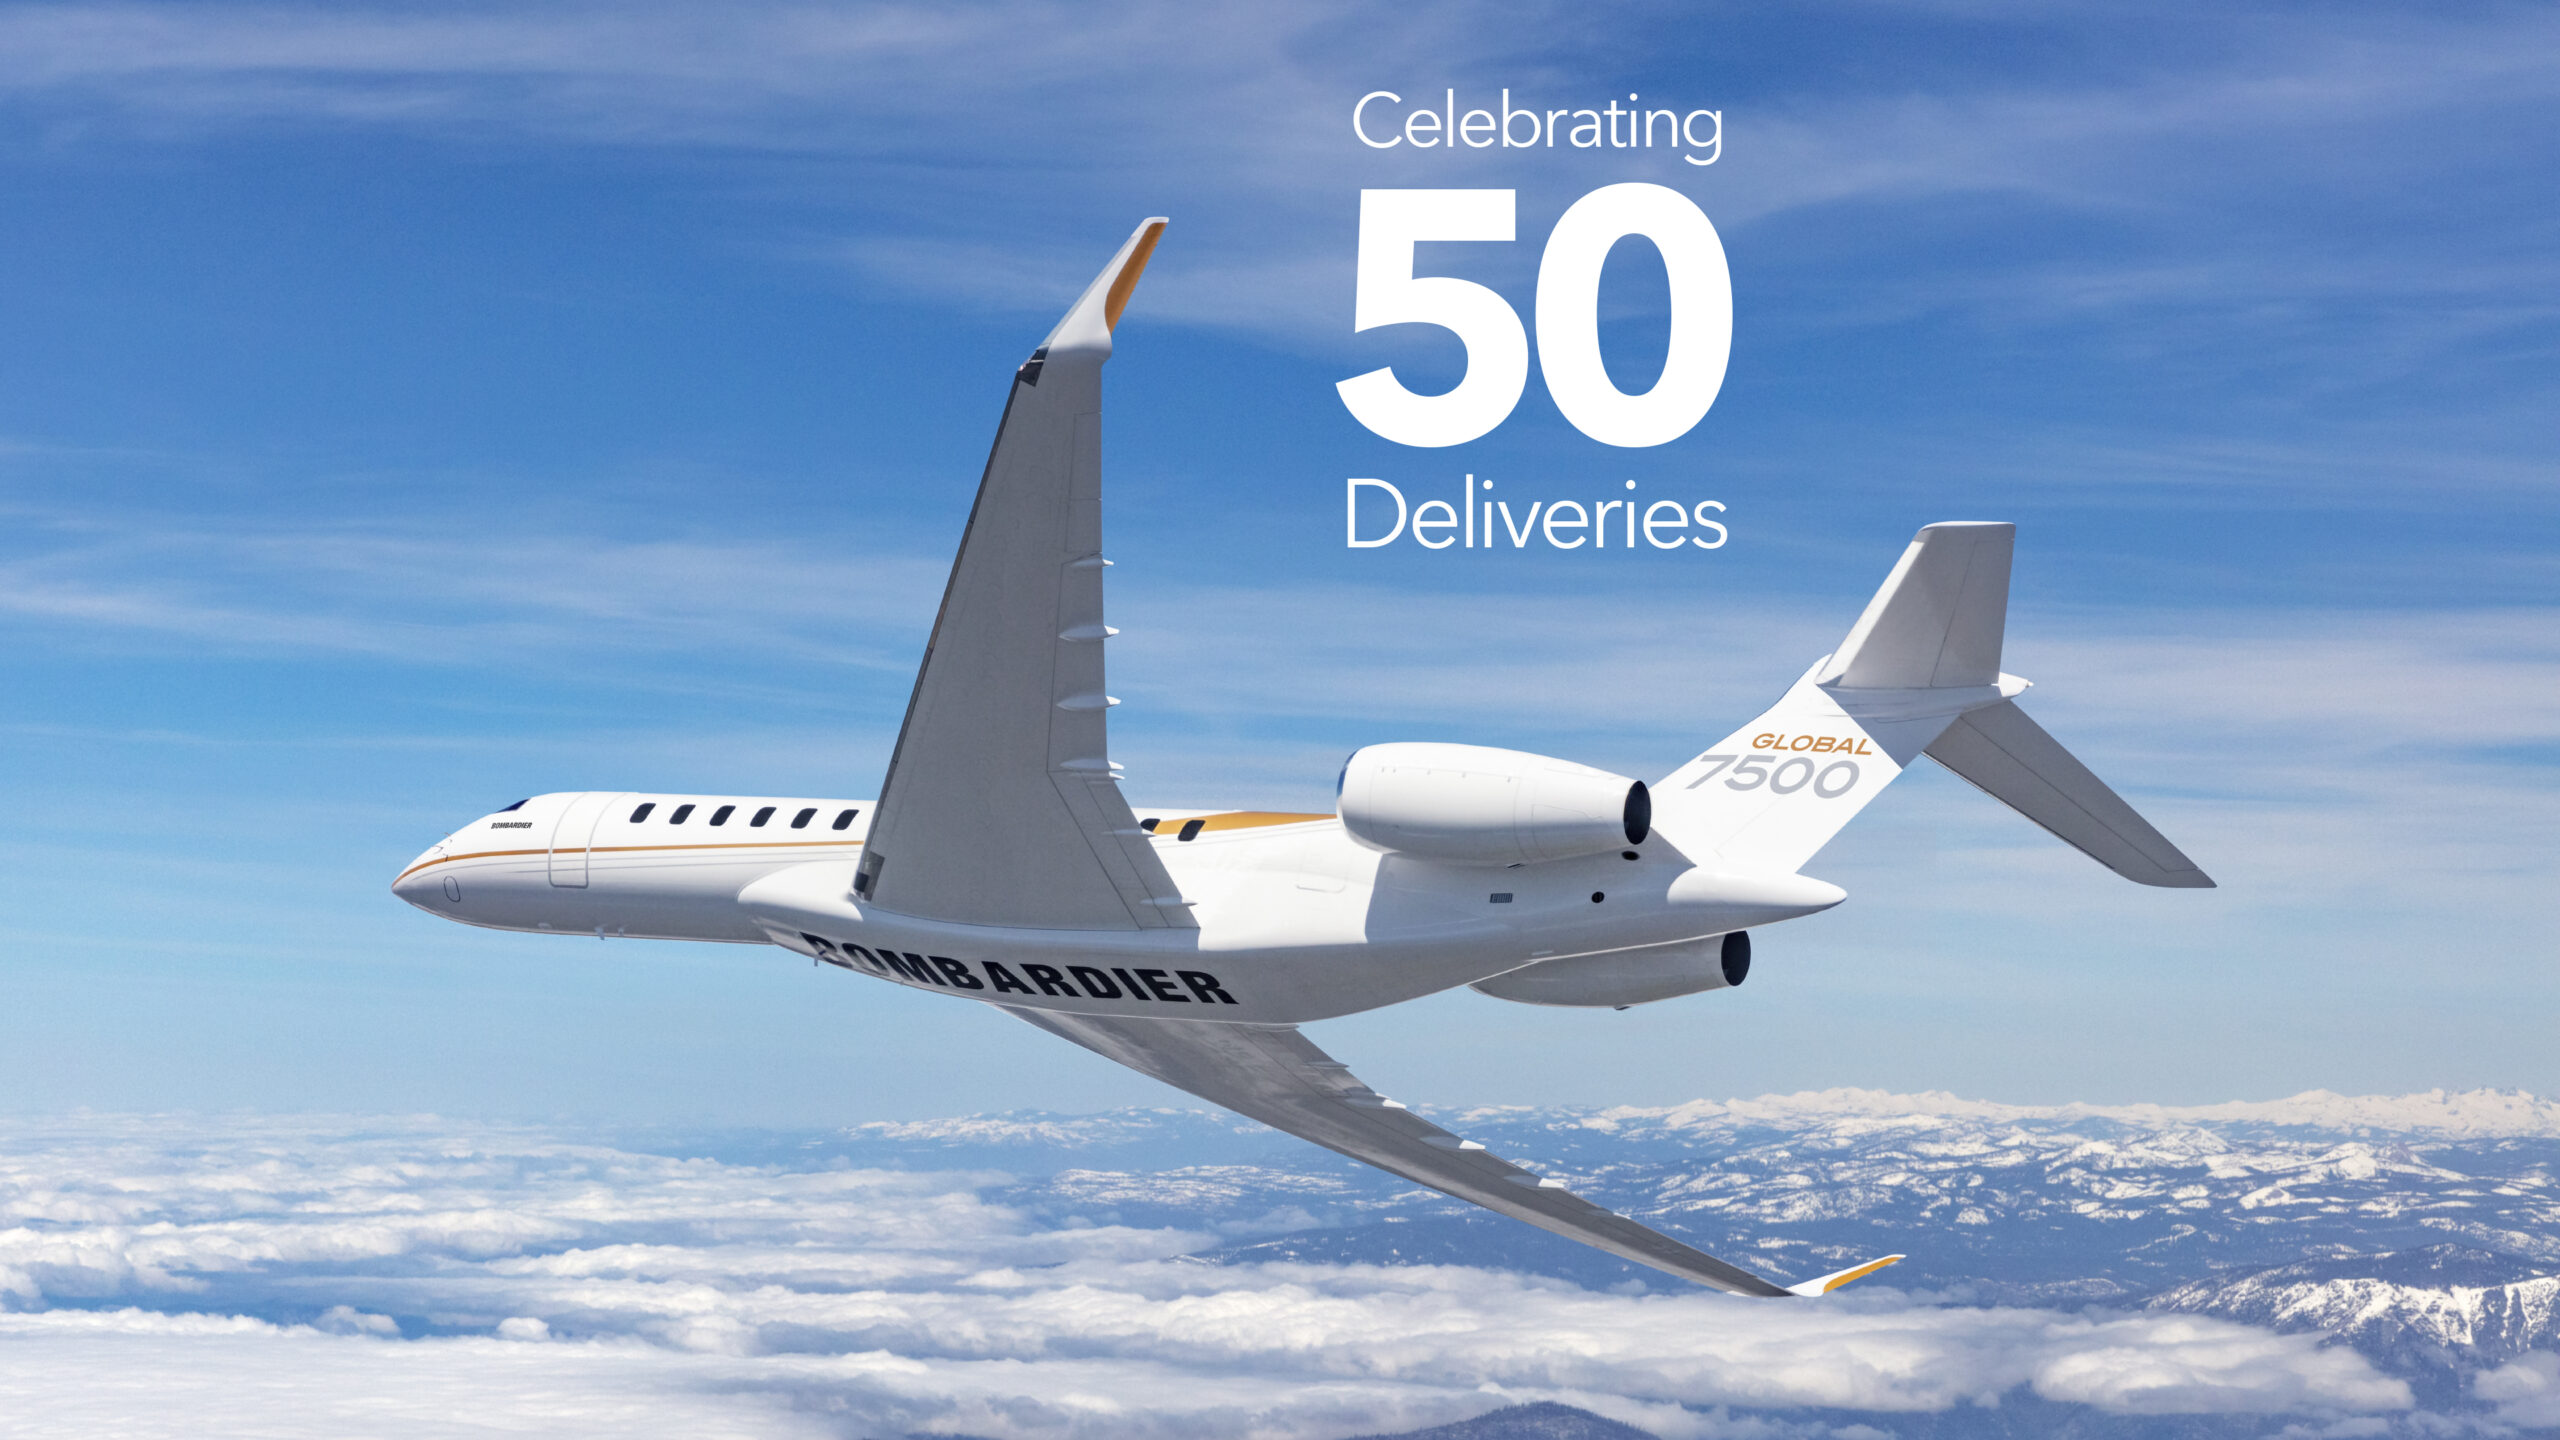 Bombardier_50thDelivery_G7500